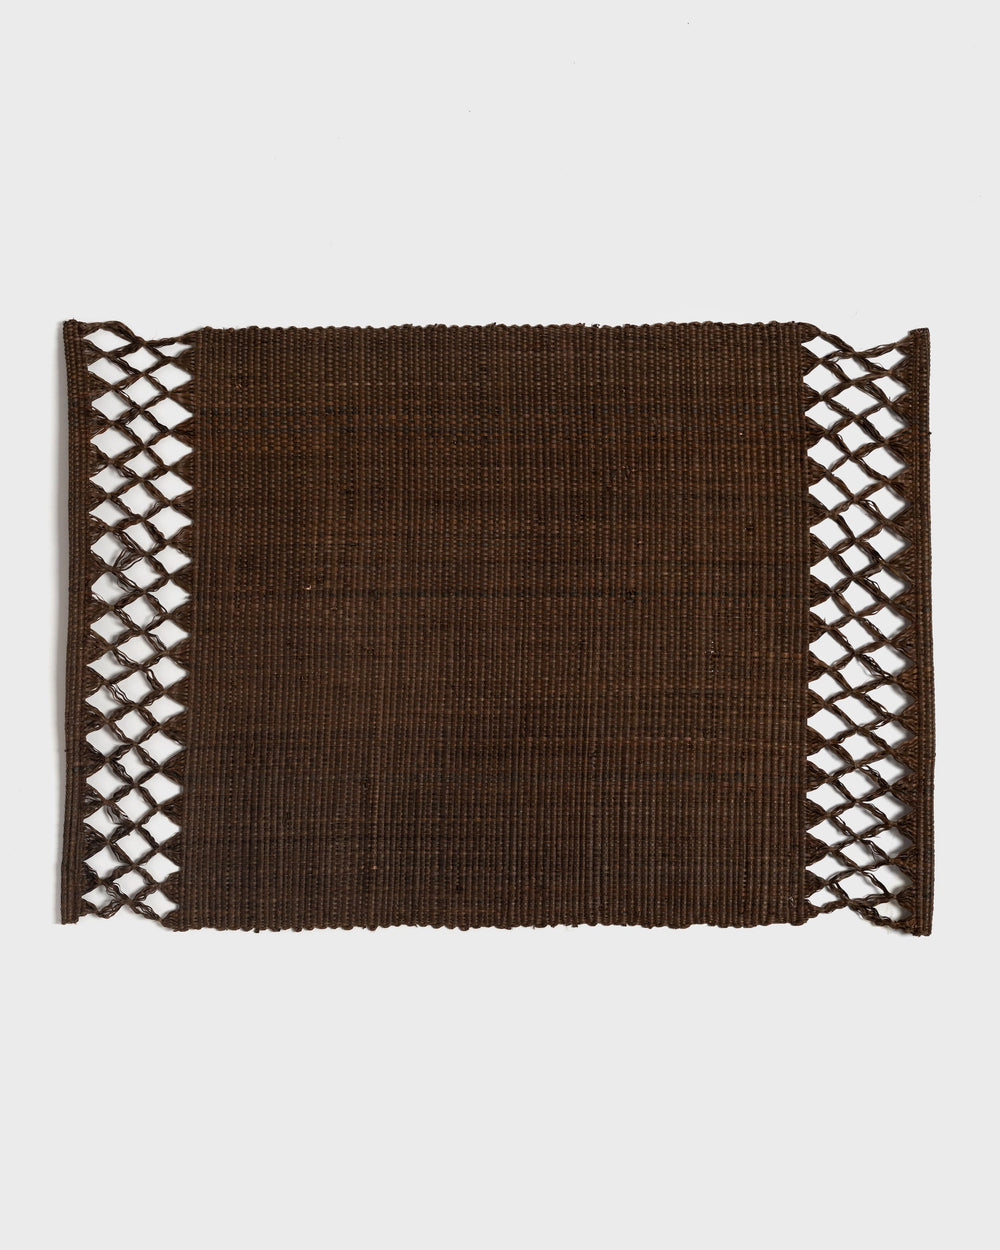 Tania Bulhoes Placemat Buzios Brown